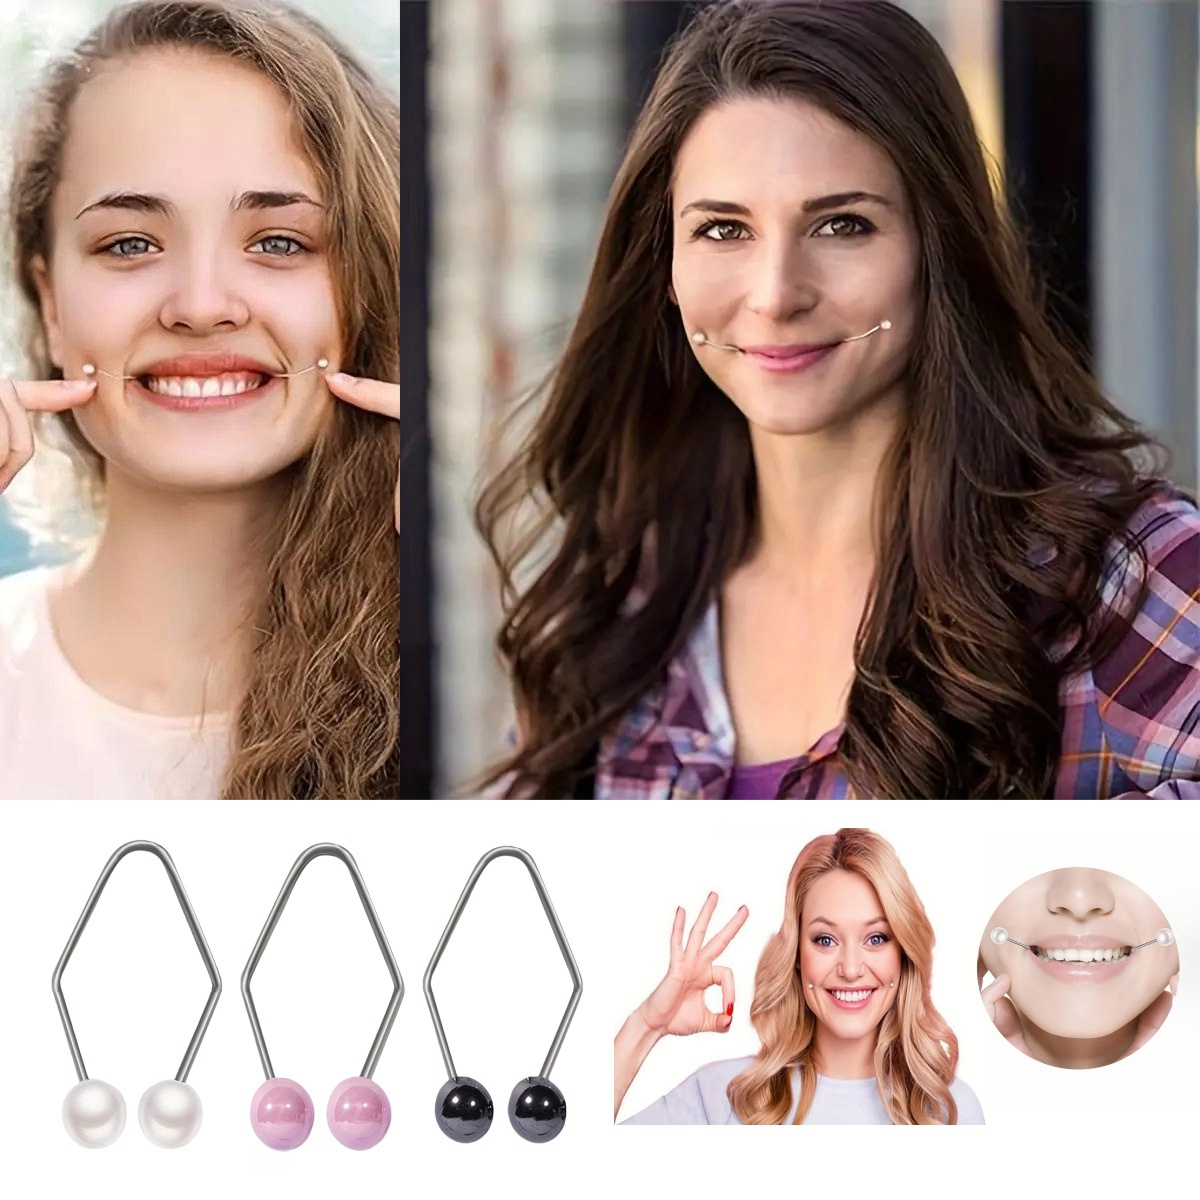 

2-piece Natural Dimple Makers - Easy-to-use Face Trainer For A Beautiful Smile & Developing Realistic Dimples, No Batteries Required